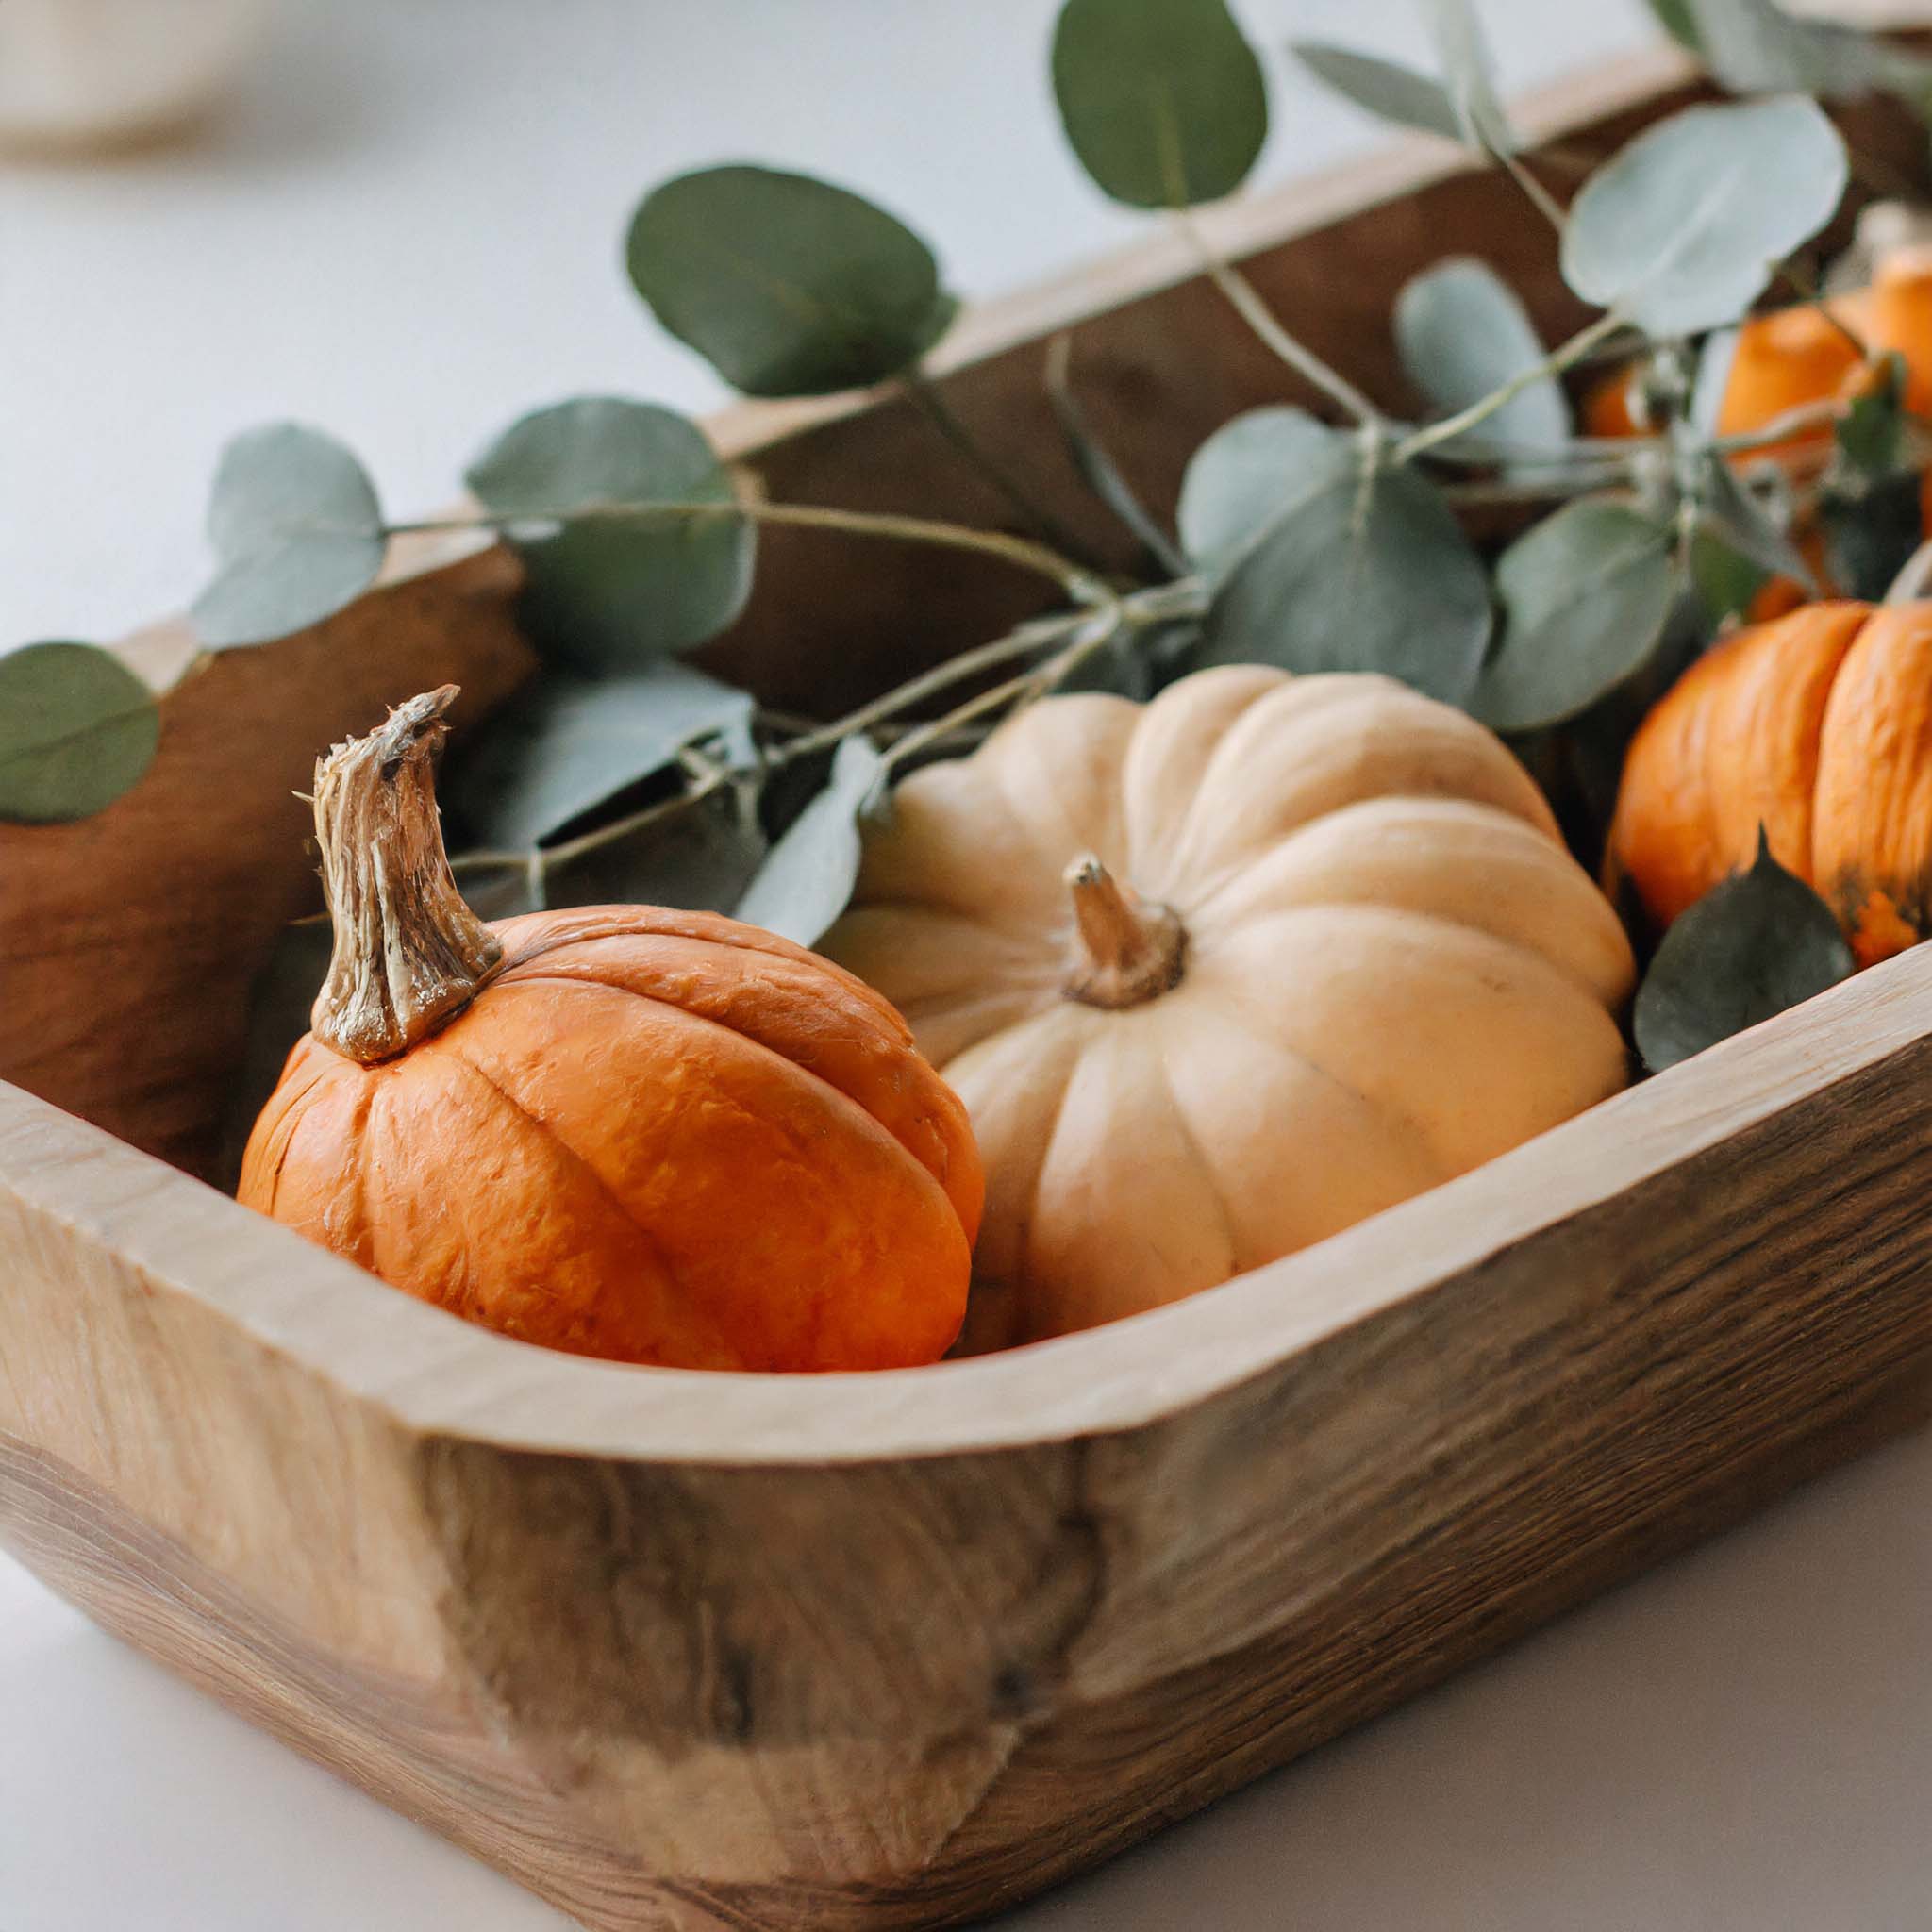 Wooden dough bowl filled with pumpkins and eucalyptus.